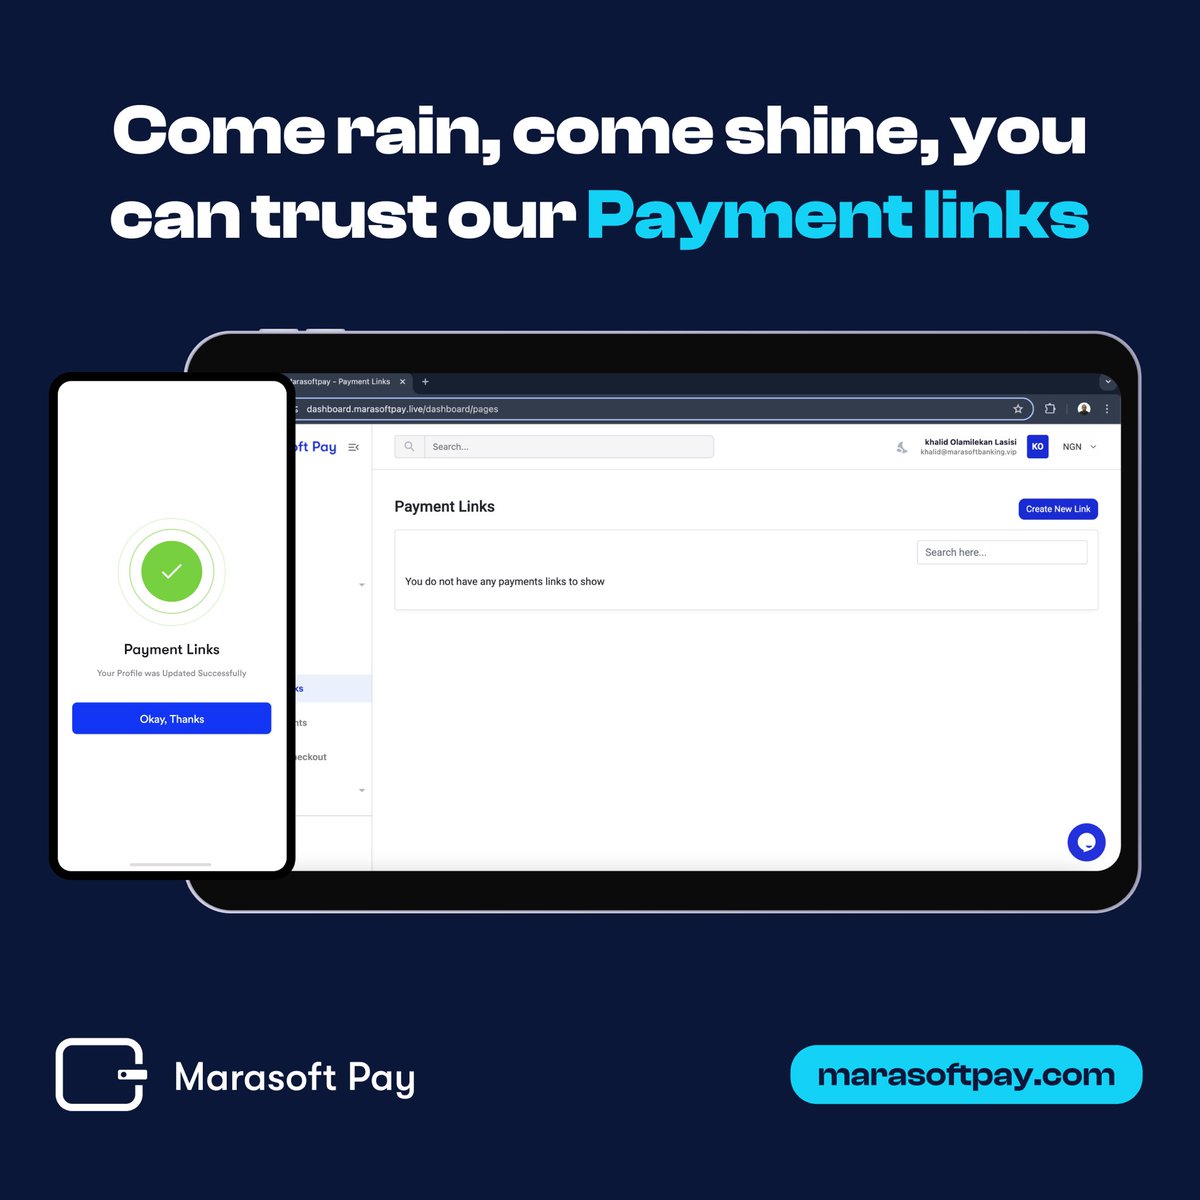 Don’t let bad weather get in the way of your payment transactions. Our payment links are guaranteed to work anytime, our payment links are always reliable!

#MarasoftPay #paymentlinks #paymentsolutions